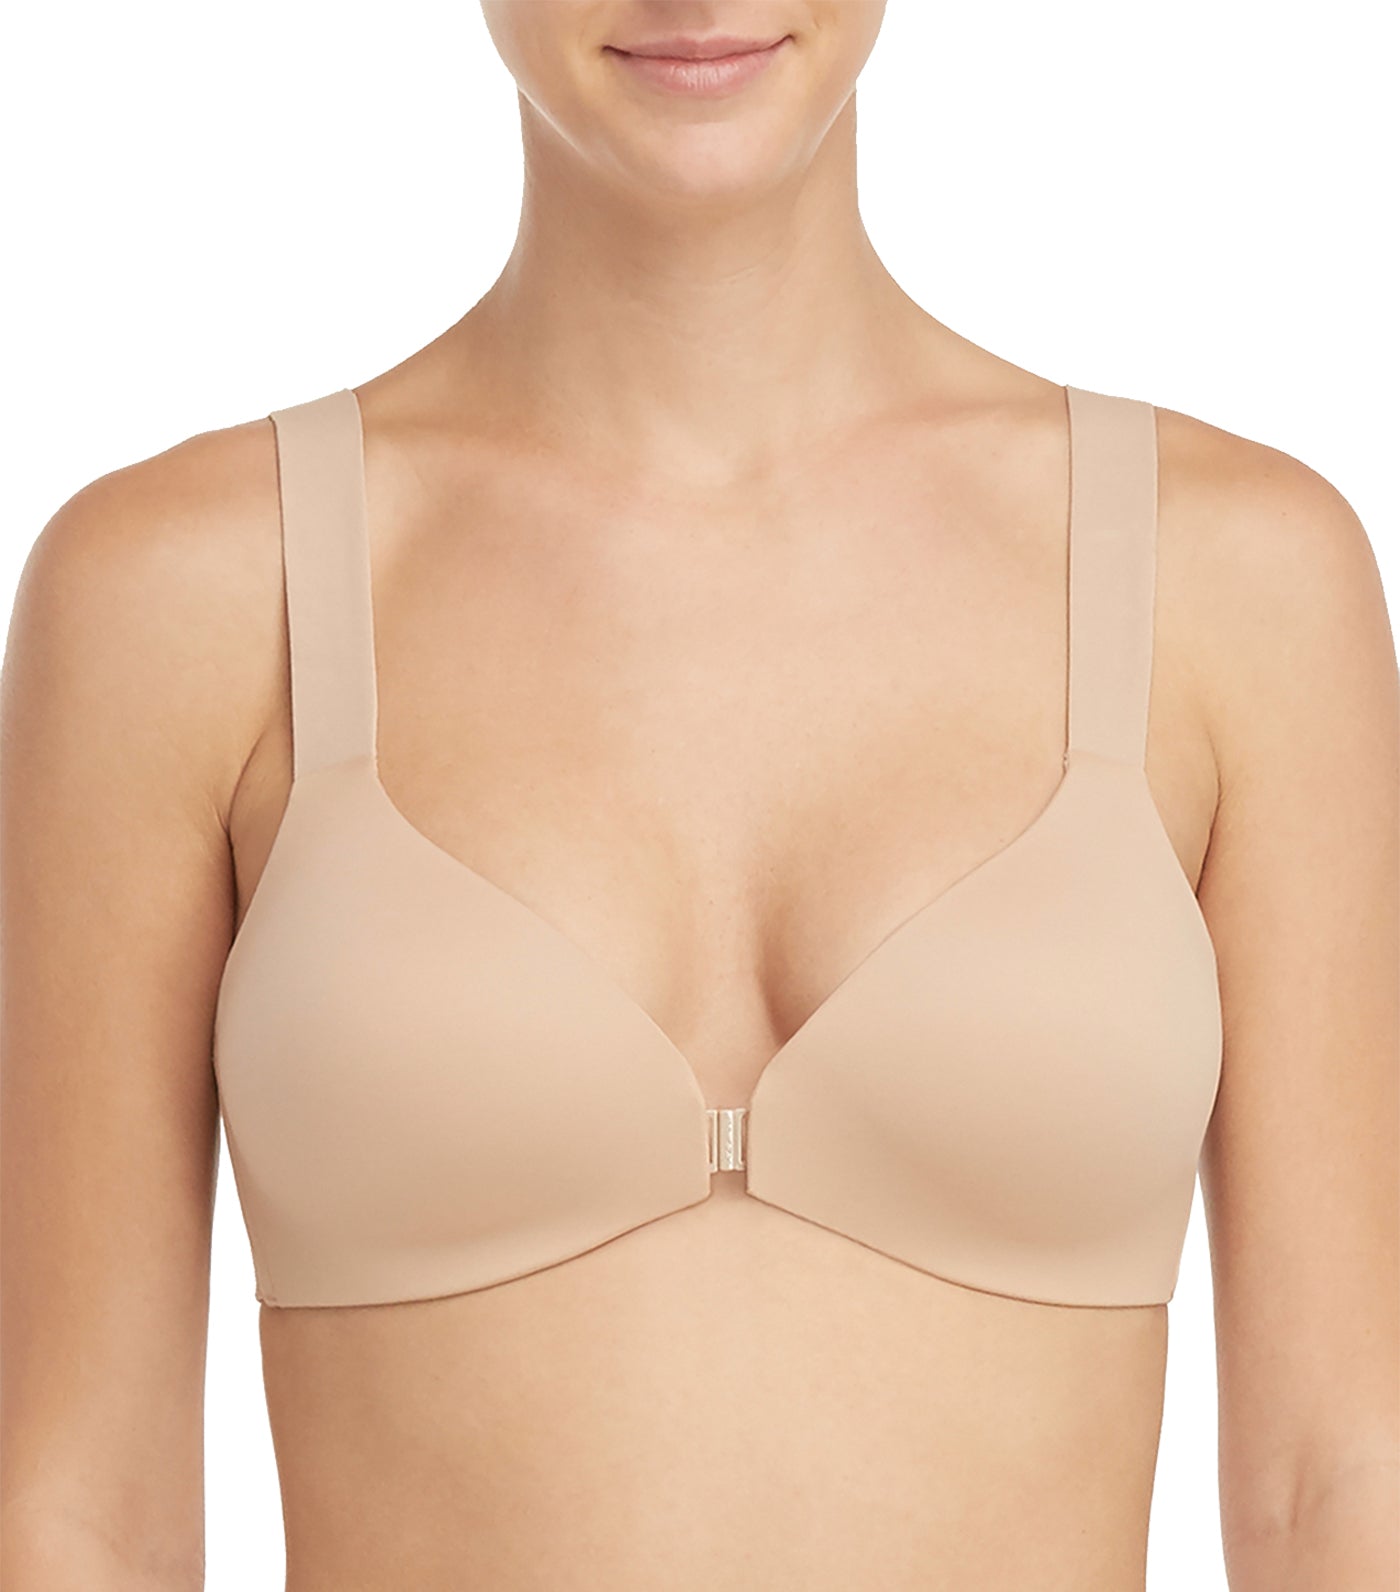 old navy womens nude bra size small - beyond exchange